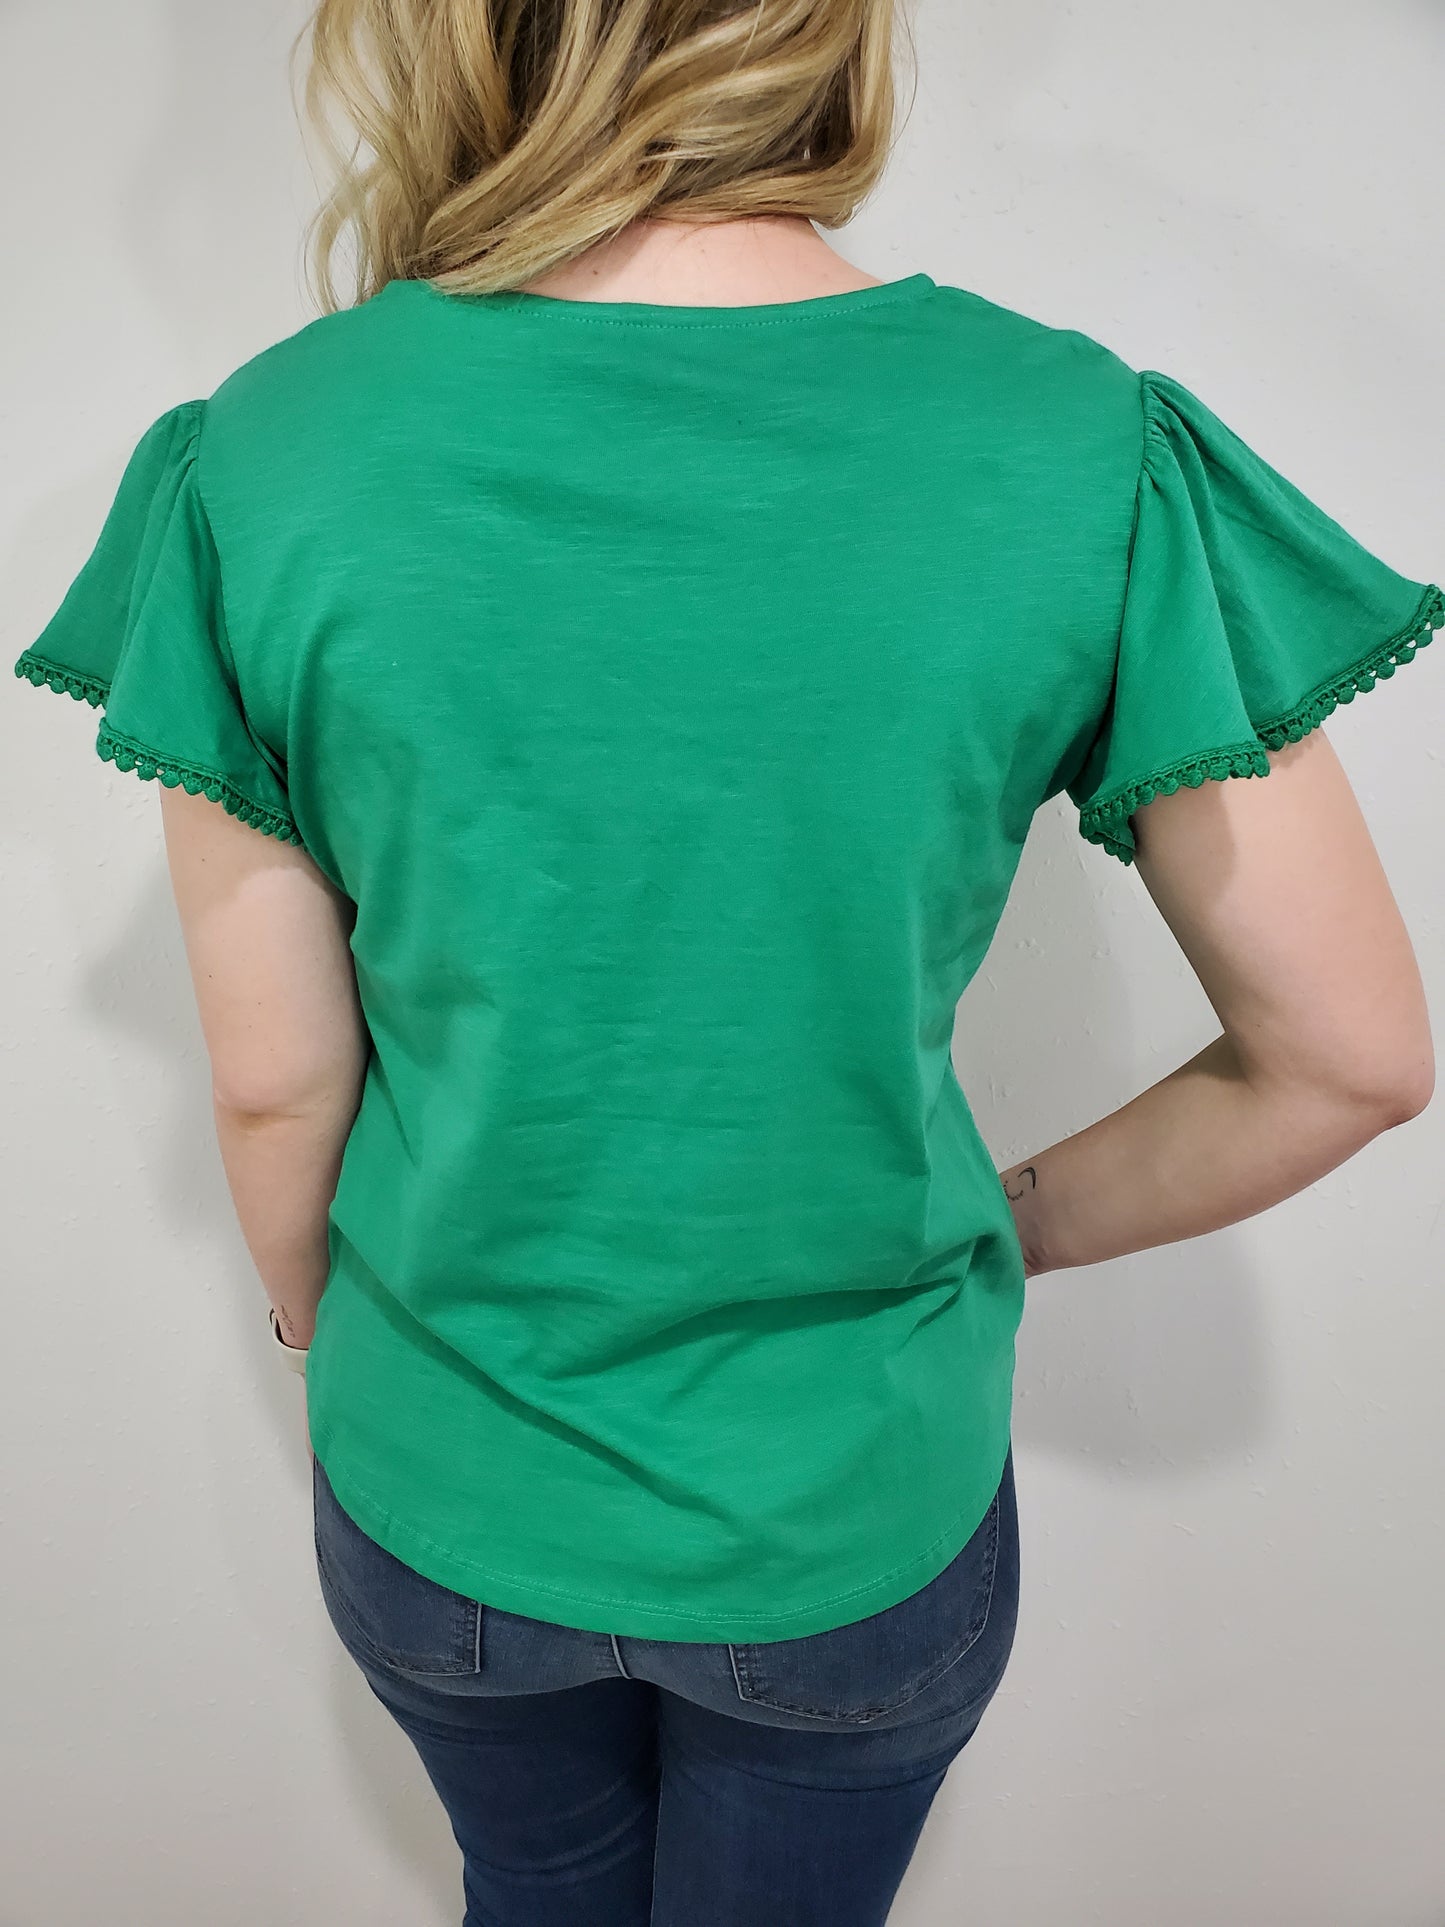 GREEN WITH ENVY TOP